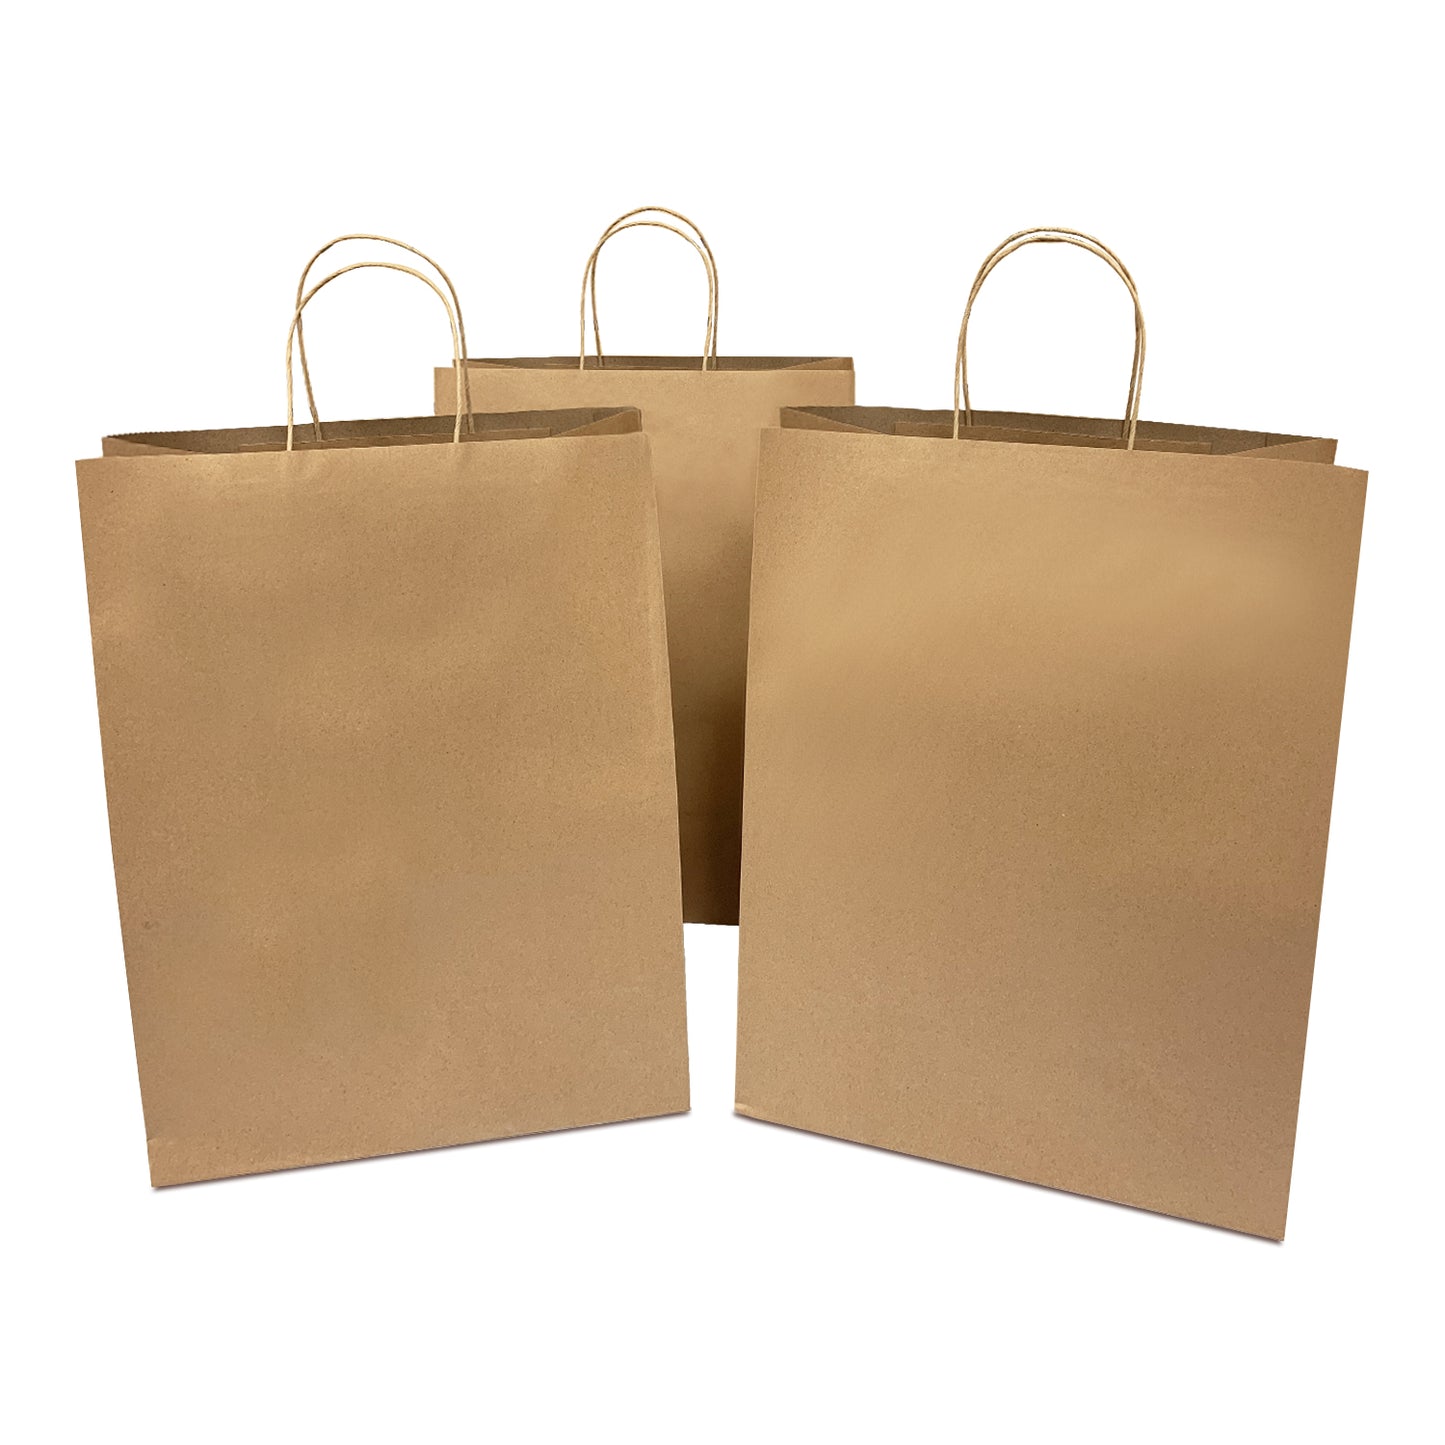 250 Pcs, Mart, 13x7x17 inches, Kraft Paper Bags, with Twisted Handle